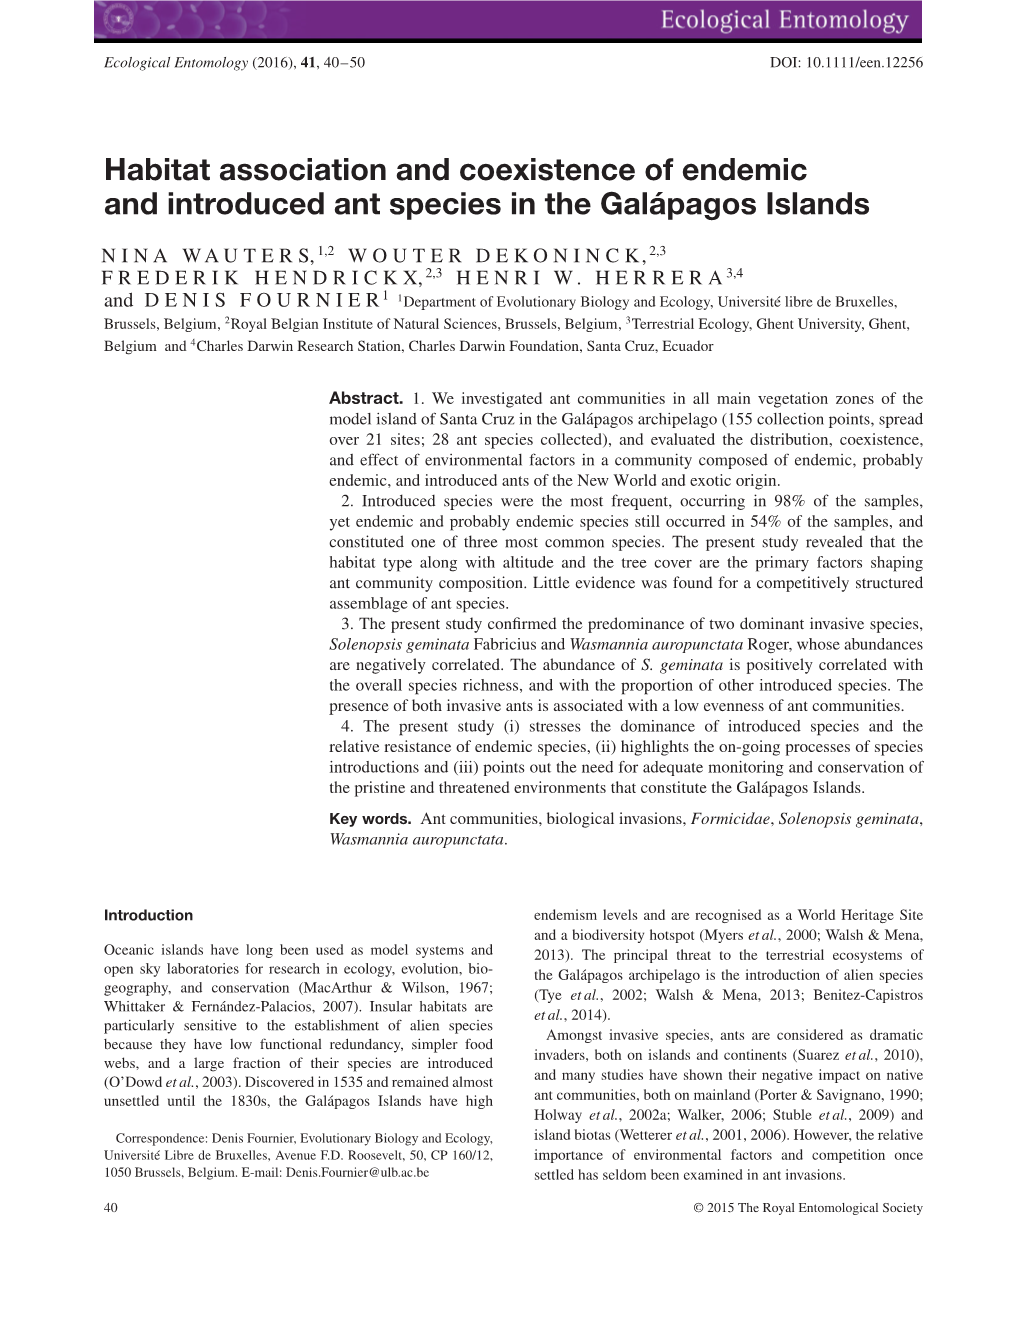 Habitat Association and Coexistence of Endemic and Introduced Ant Species in the Galápagos Islands